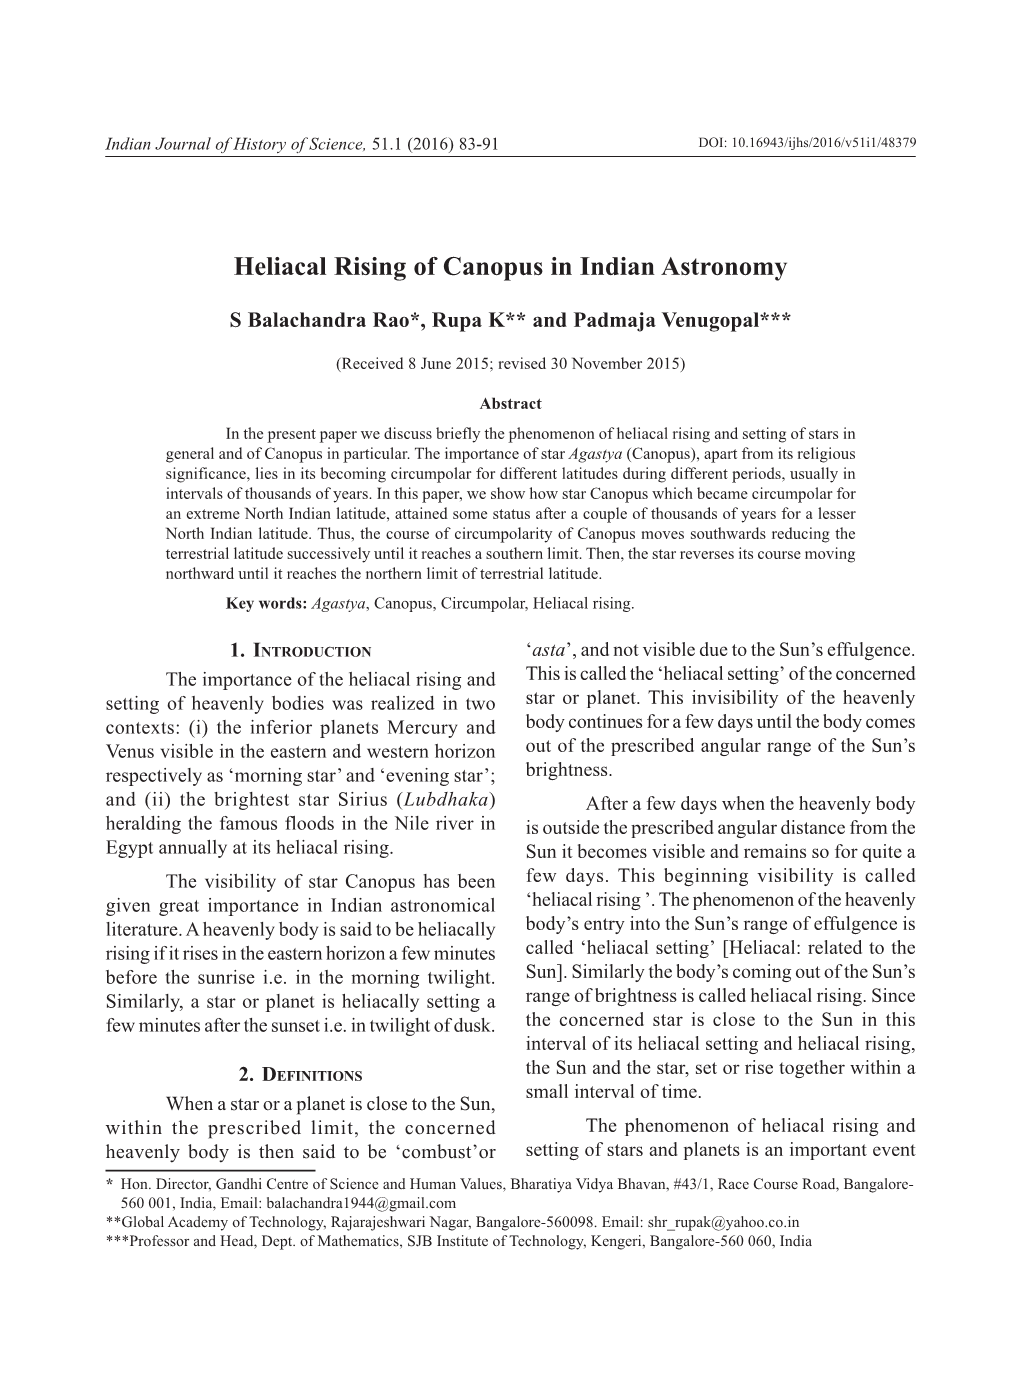 Heliacal Rising of Canopus in Indian Astronomy